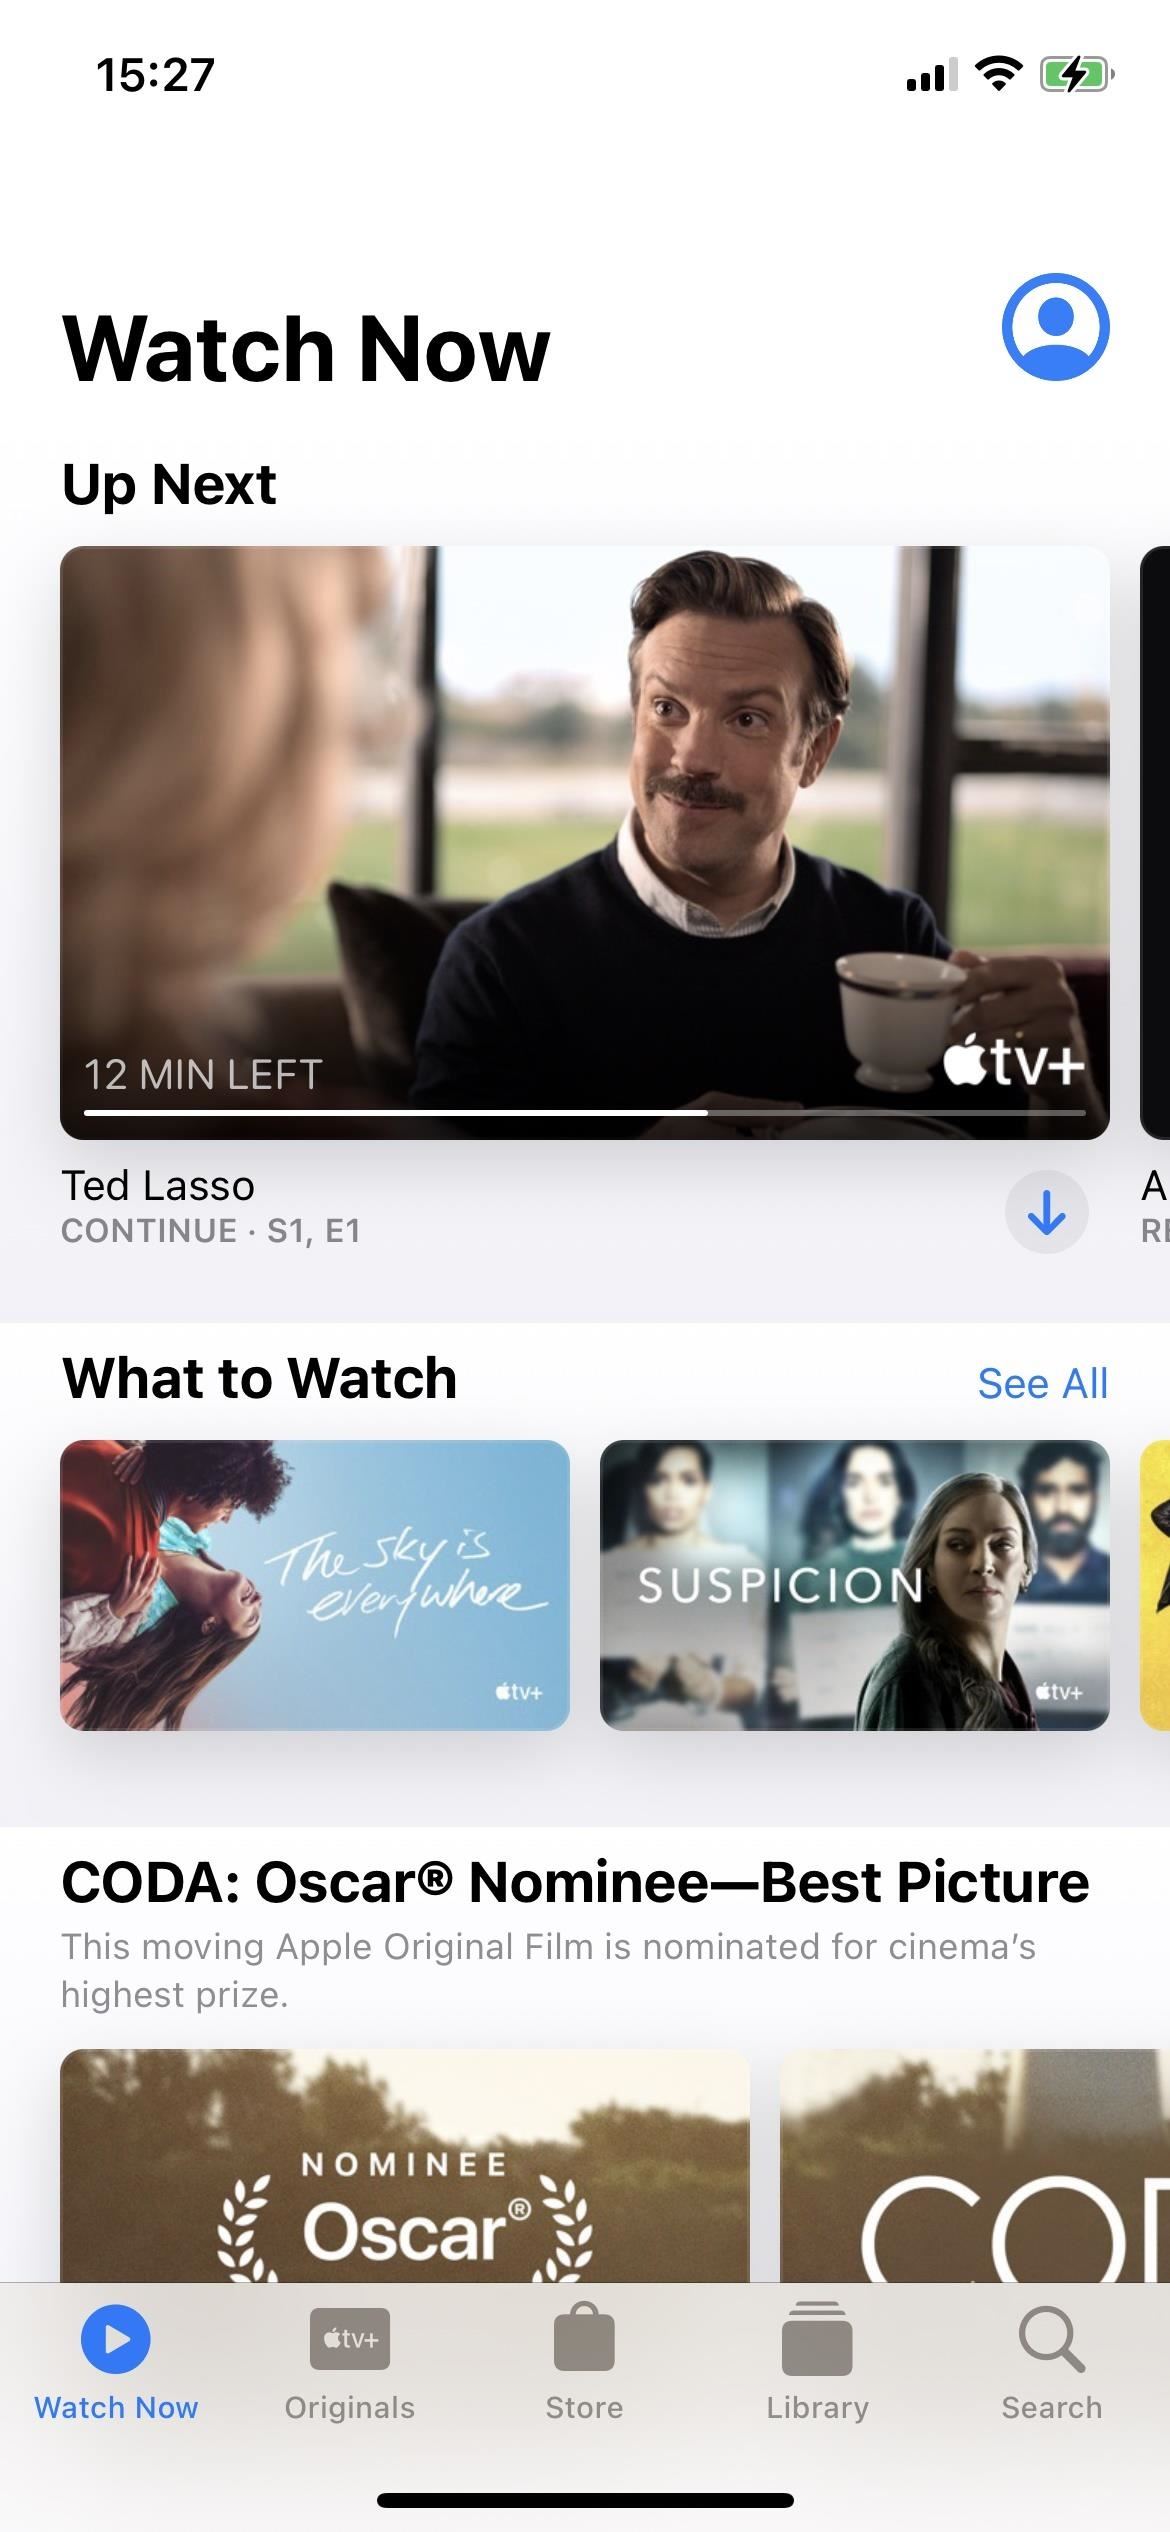 The 8 Coolest Hidden Features for Your iPhone's TV App